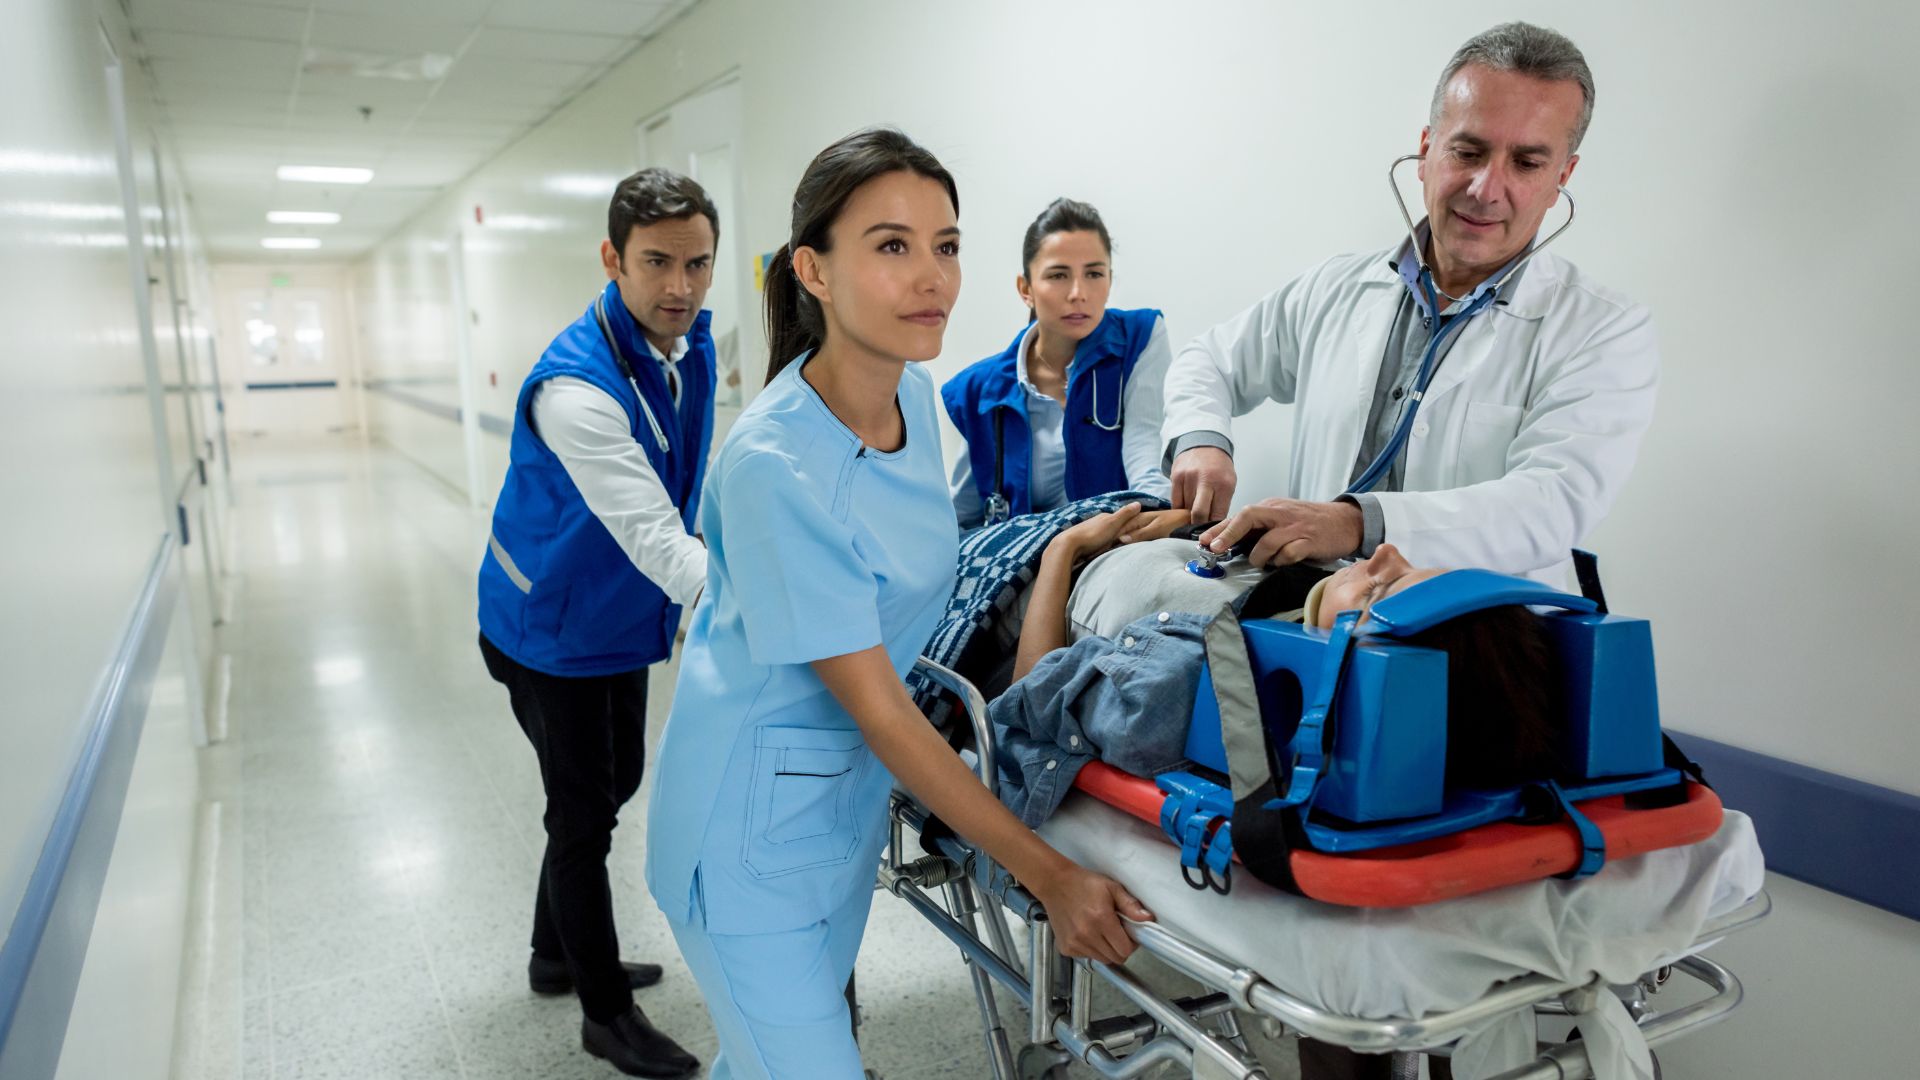 one of nursing specialties showing a critical care nurse transporting a patient in the hospital with a doctor and two other nurses